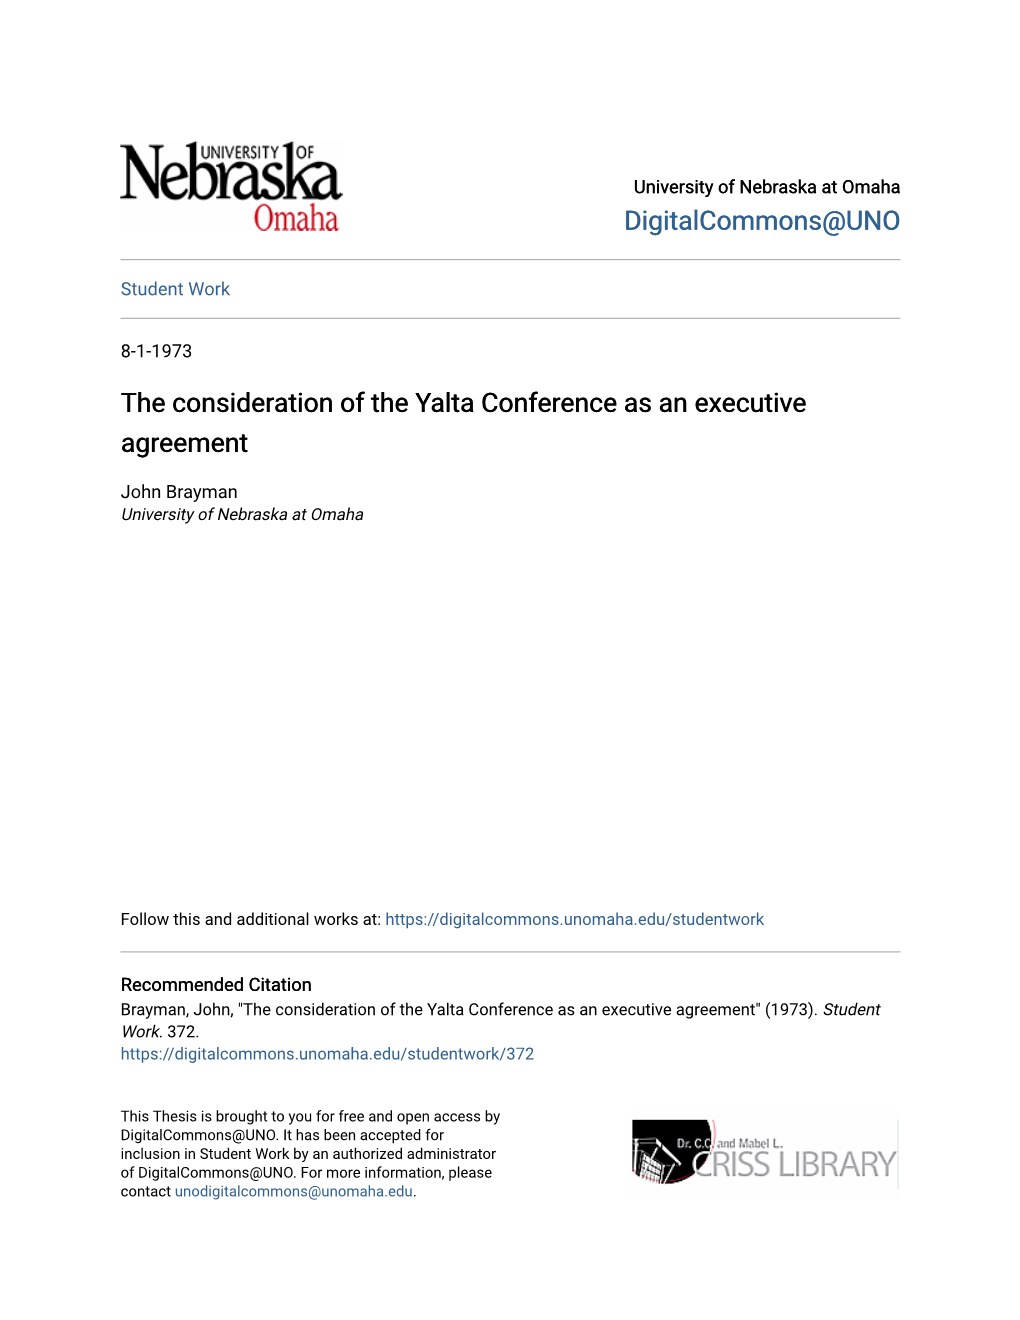 The Consideration of the Yalta Conference As an Executive Agreement